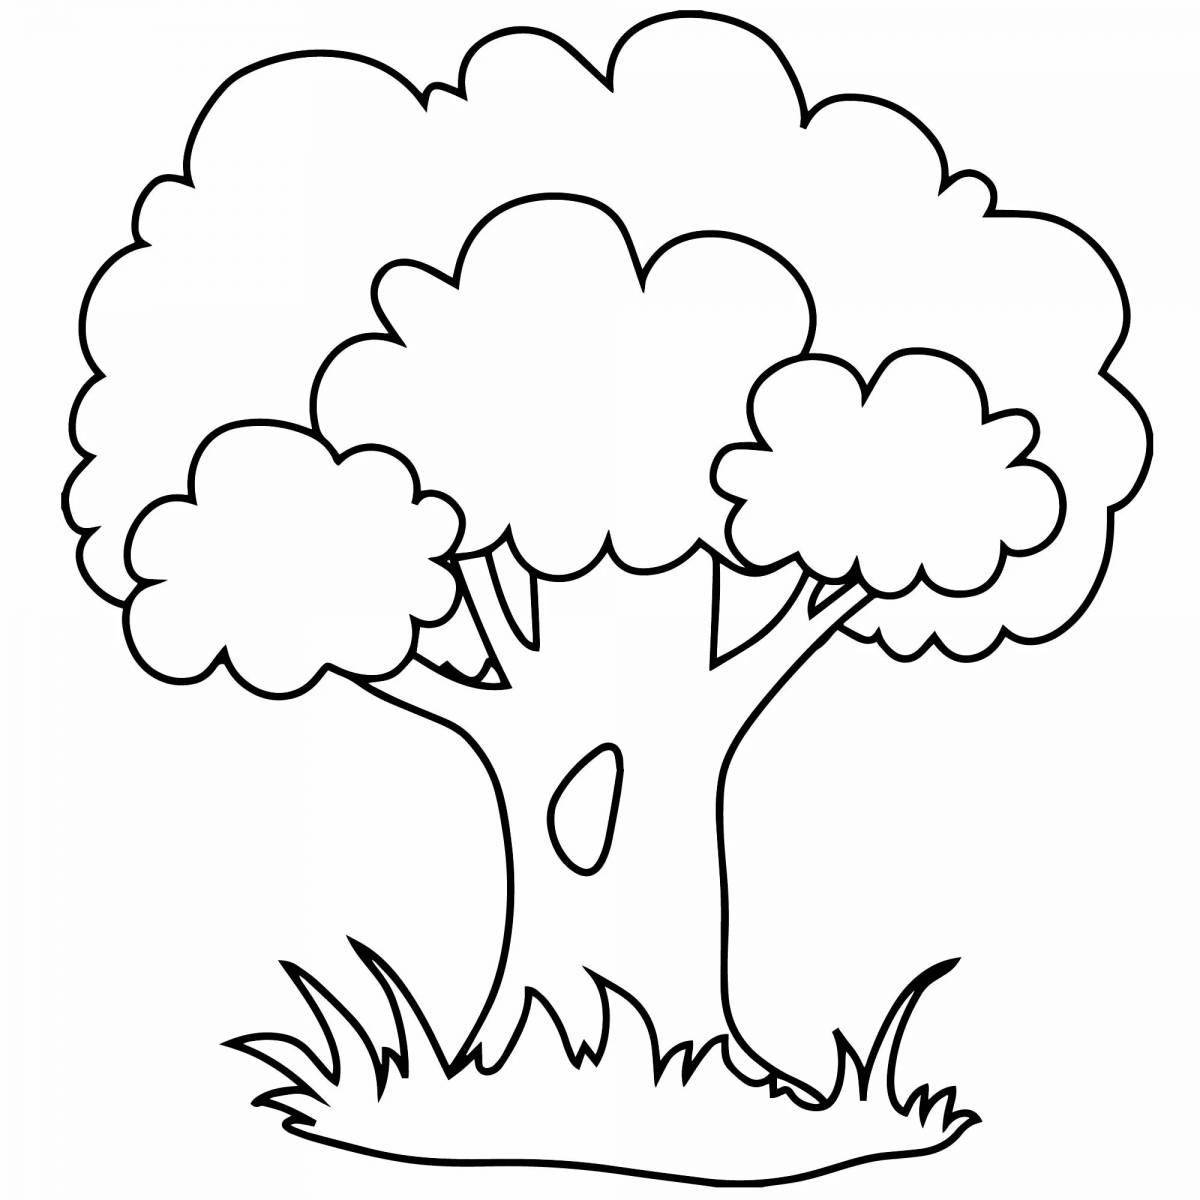 Colorful expression tree coloring pages for kids